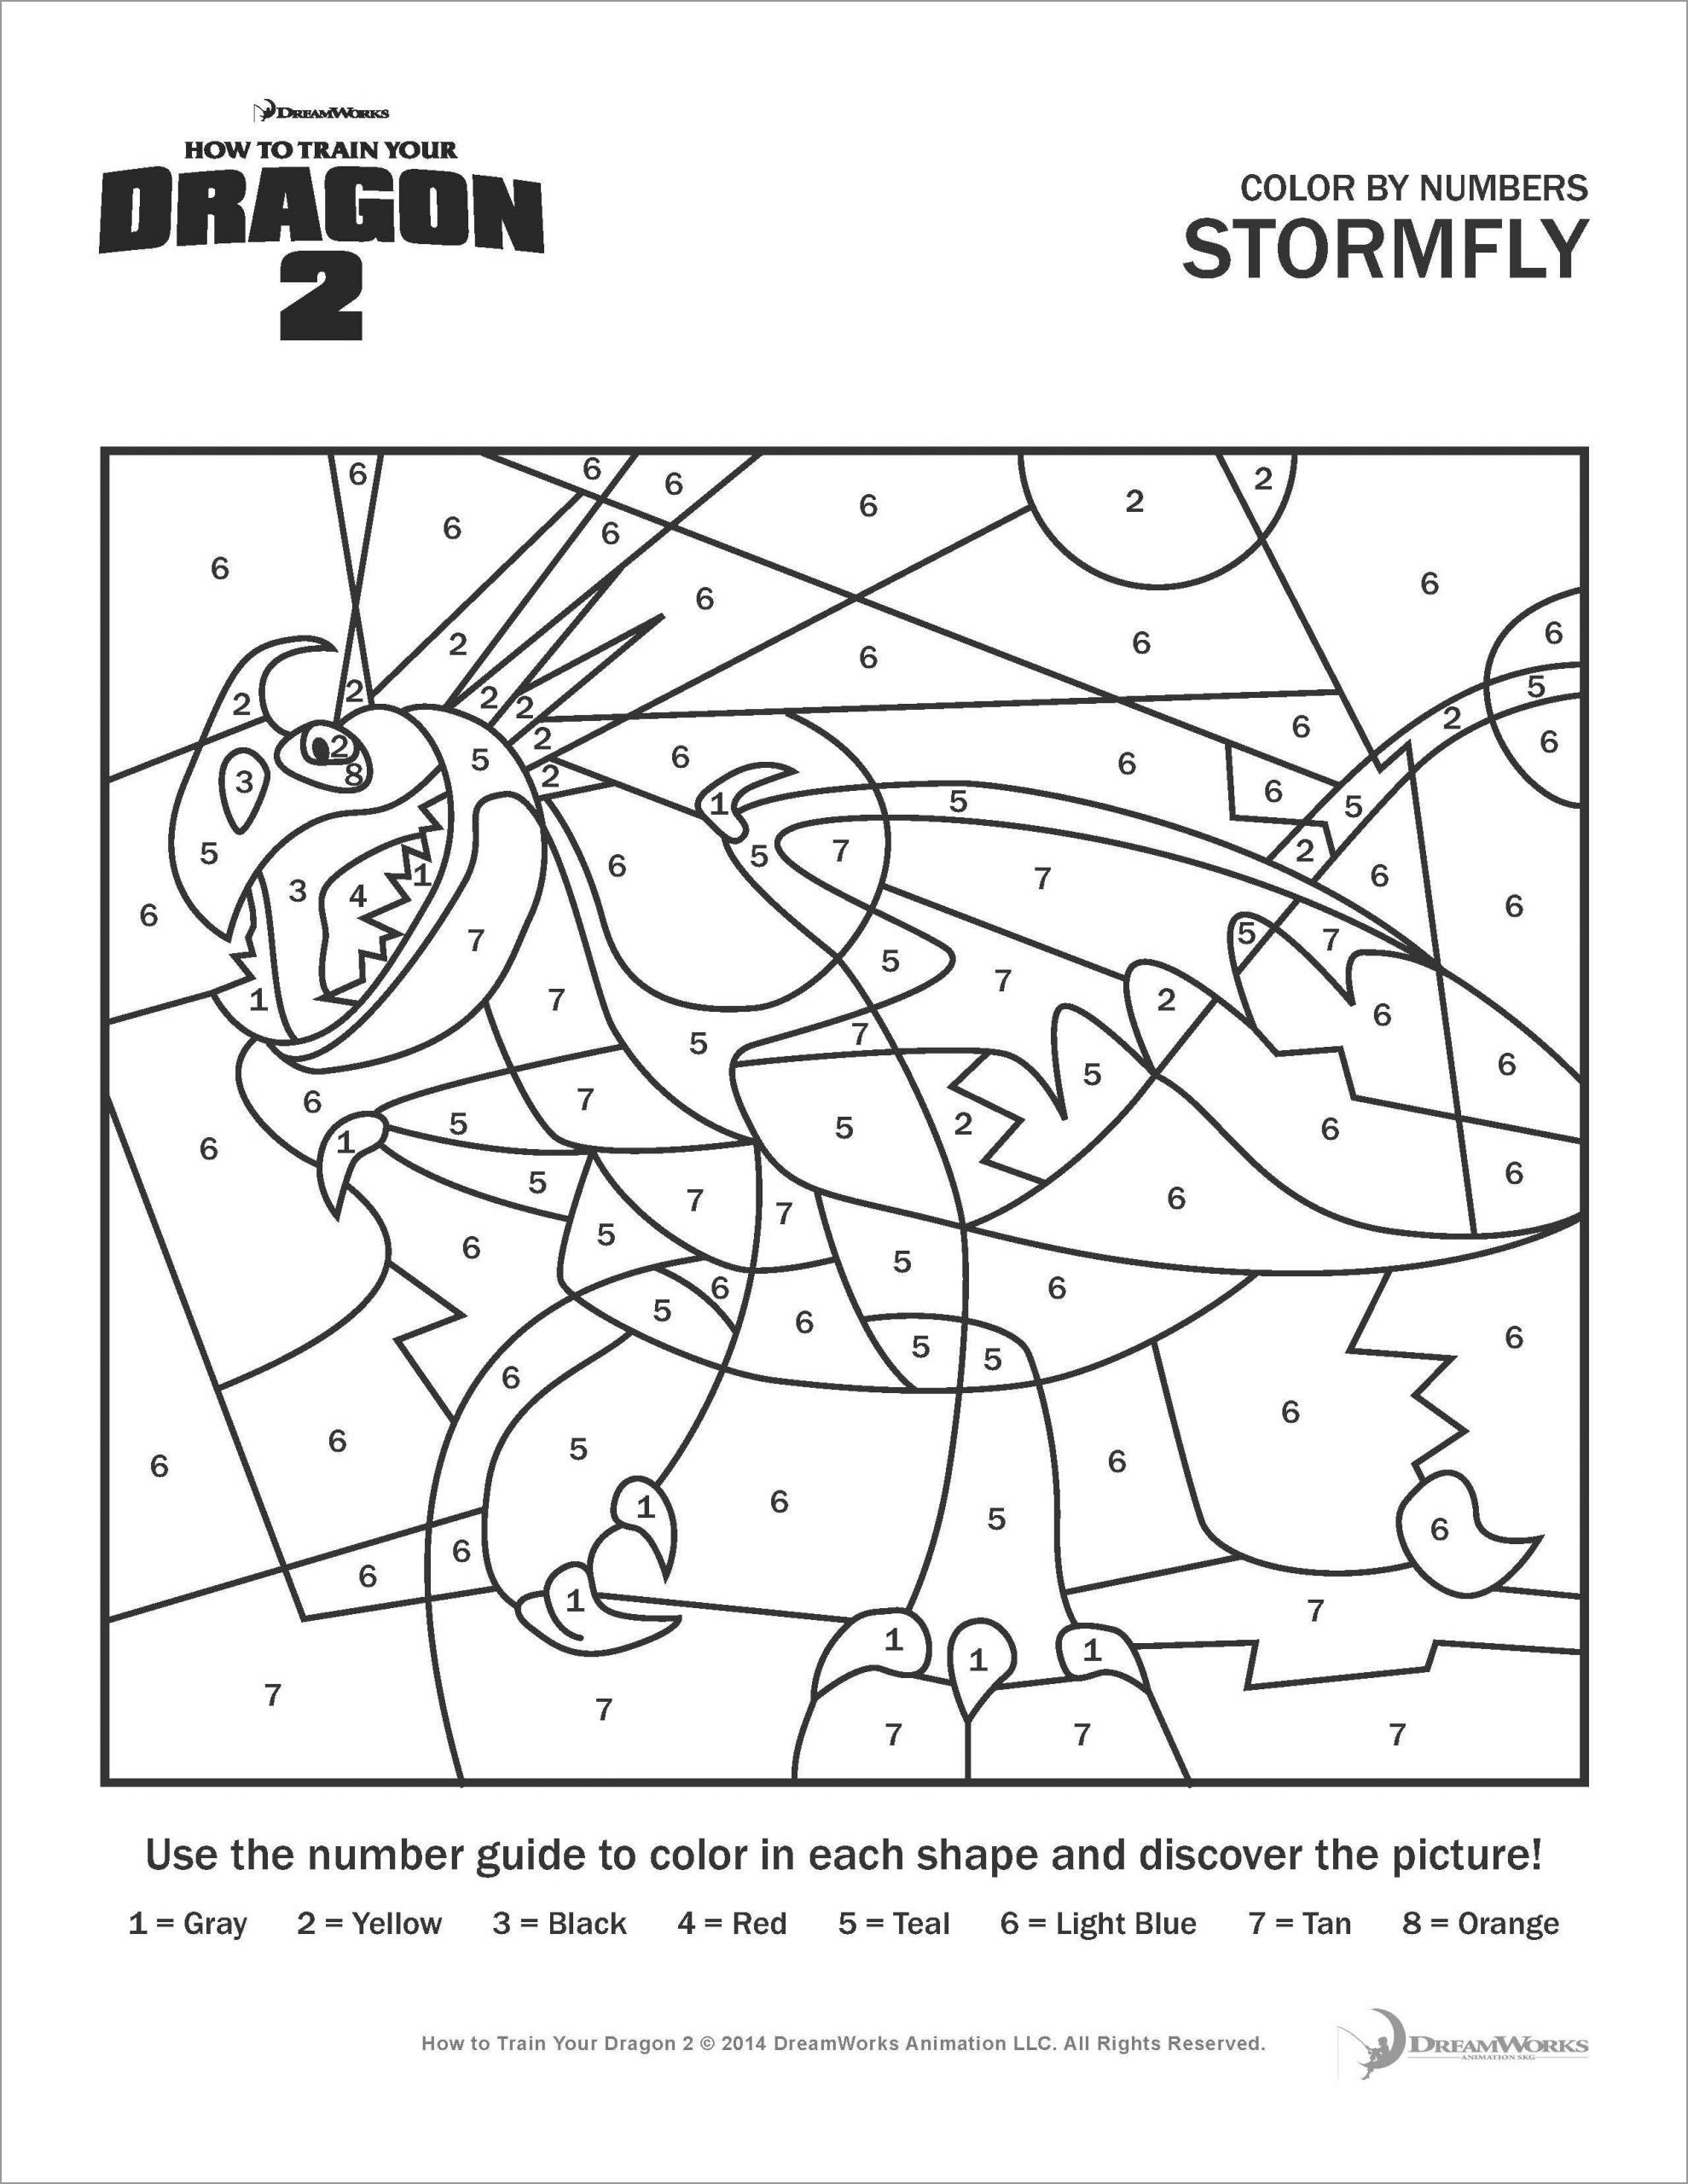 How to Train Your Dragon Stormfly Color by Number Coloring Page ...